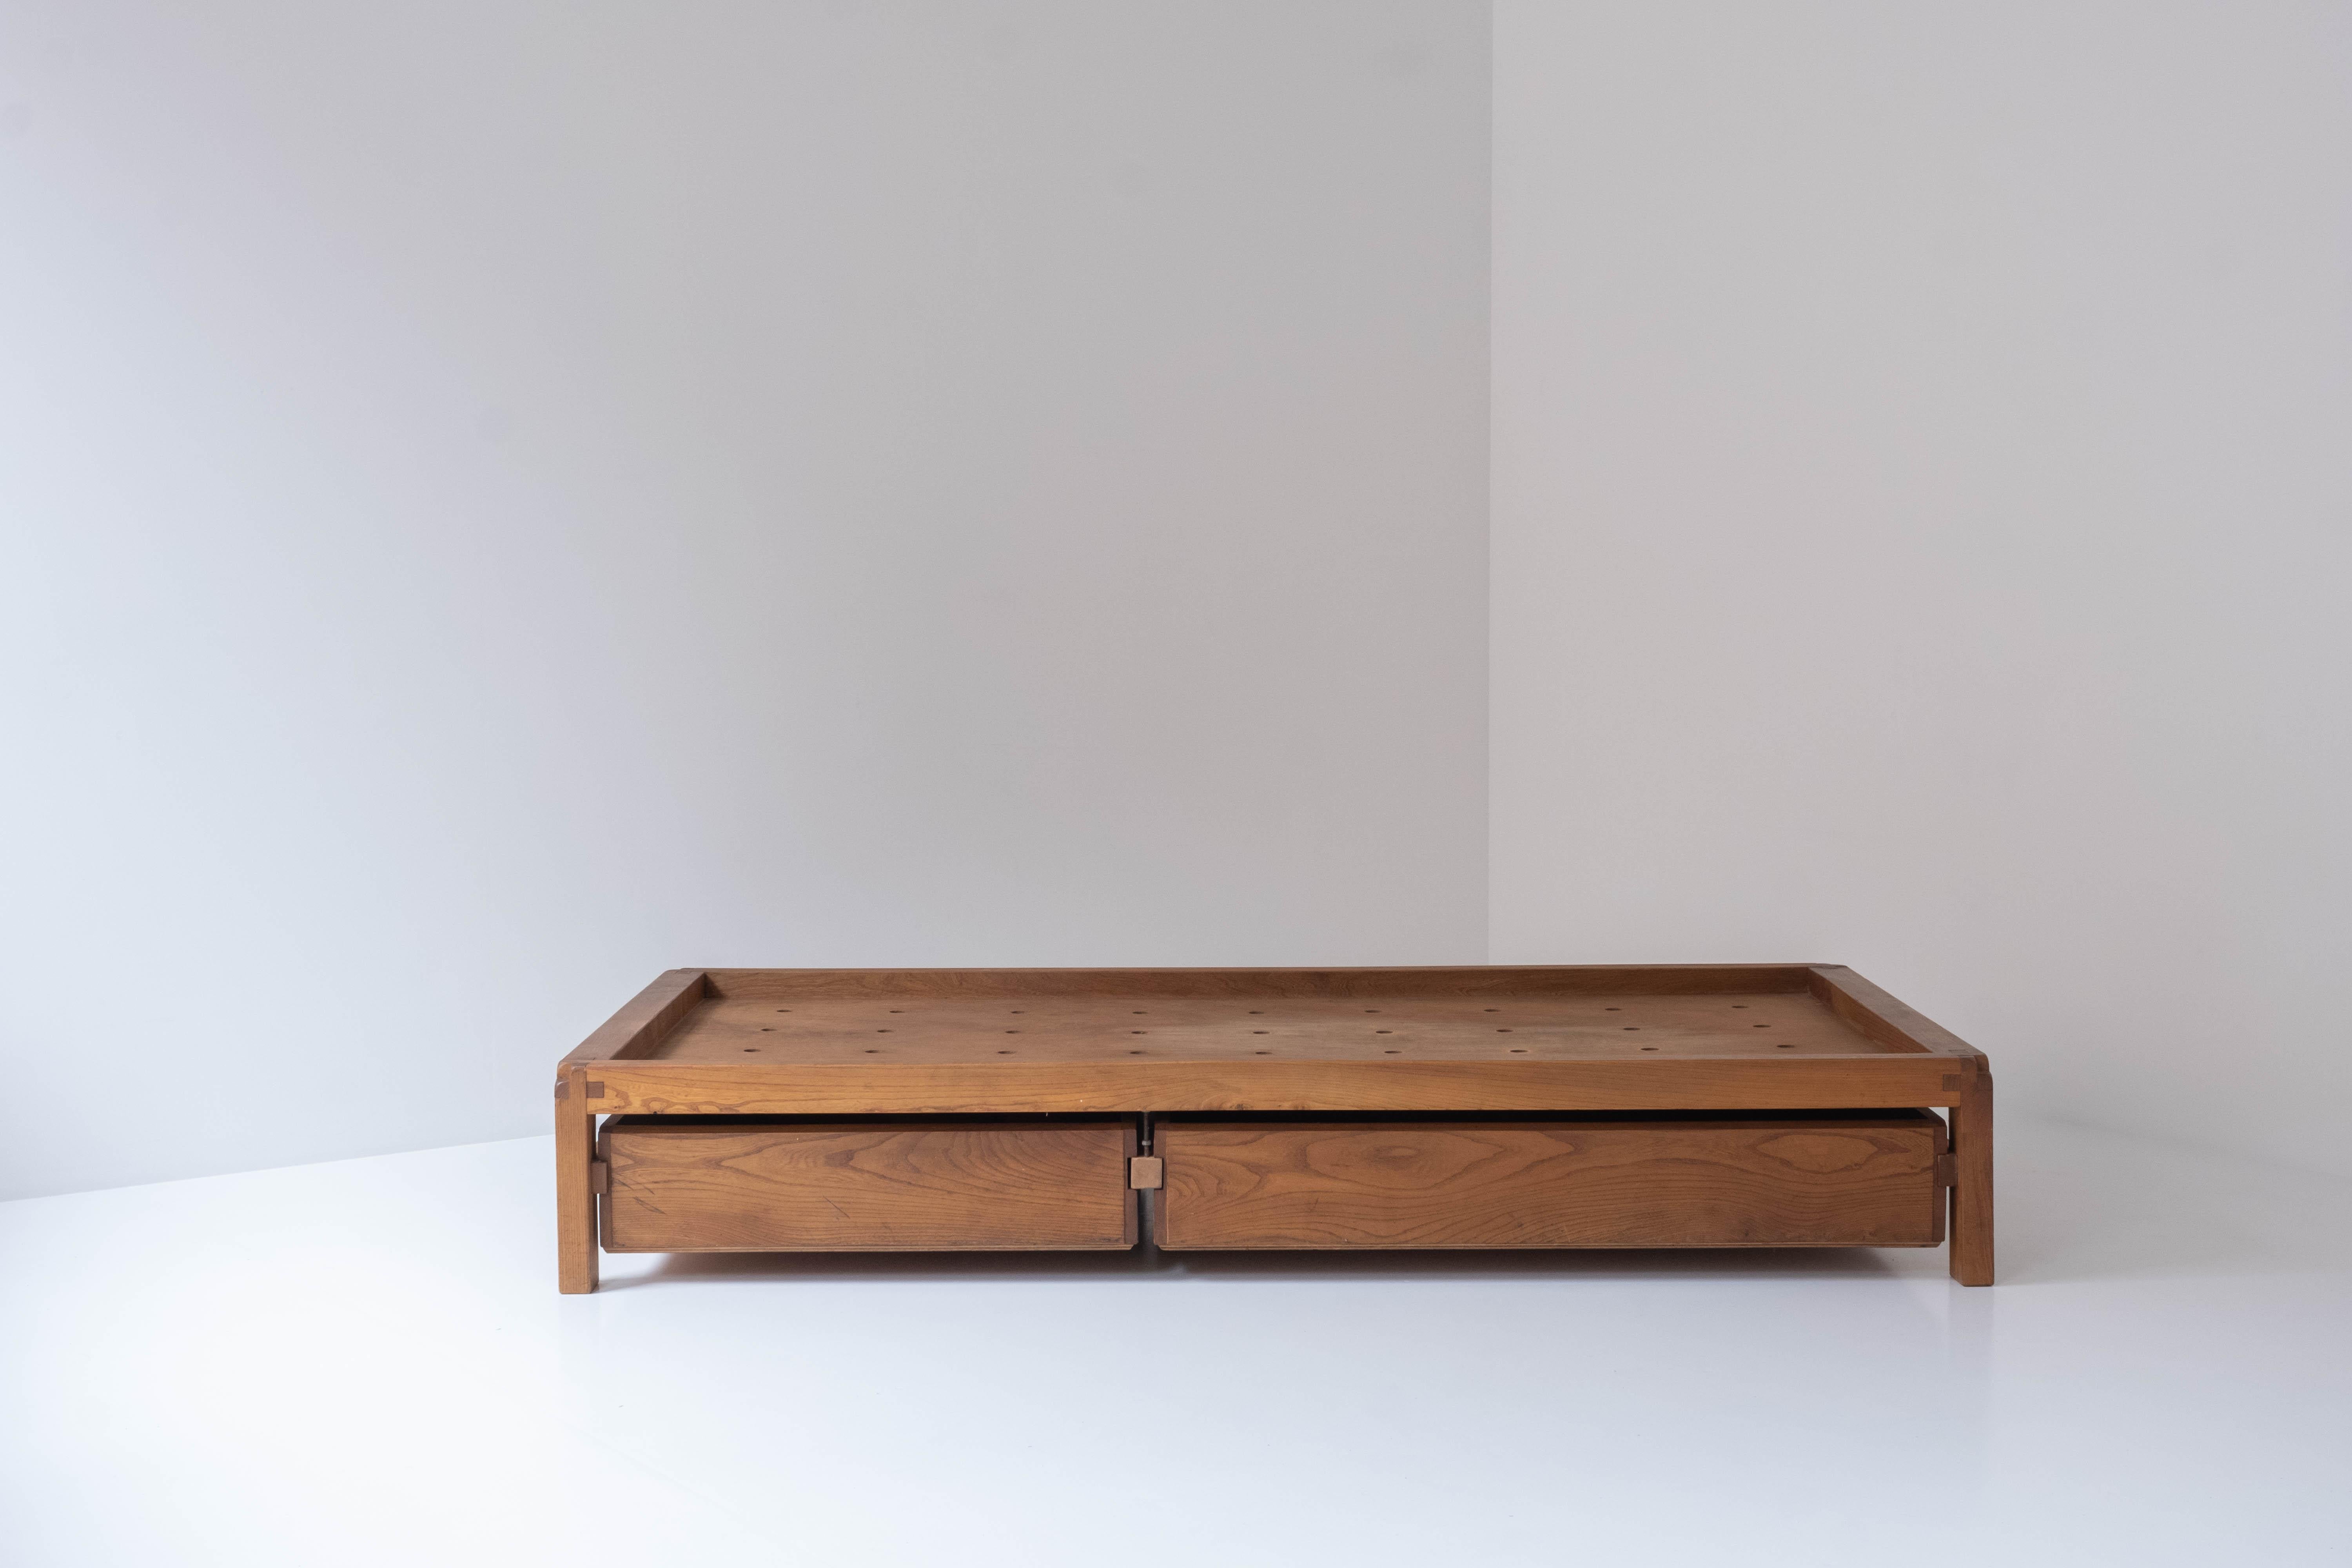 Admire this daybed model ‘L03’ by Pierre Chapo, designed and manufactured in his own workshop in France around 1965. This piece is fully handmade in solid elm wood and has a rich and warm overall patina. A set of two drawers underneath preserving a